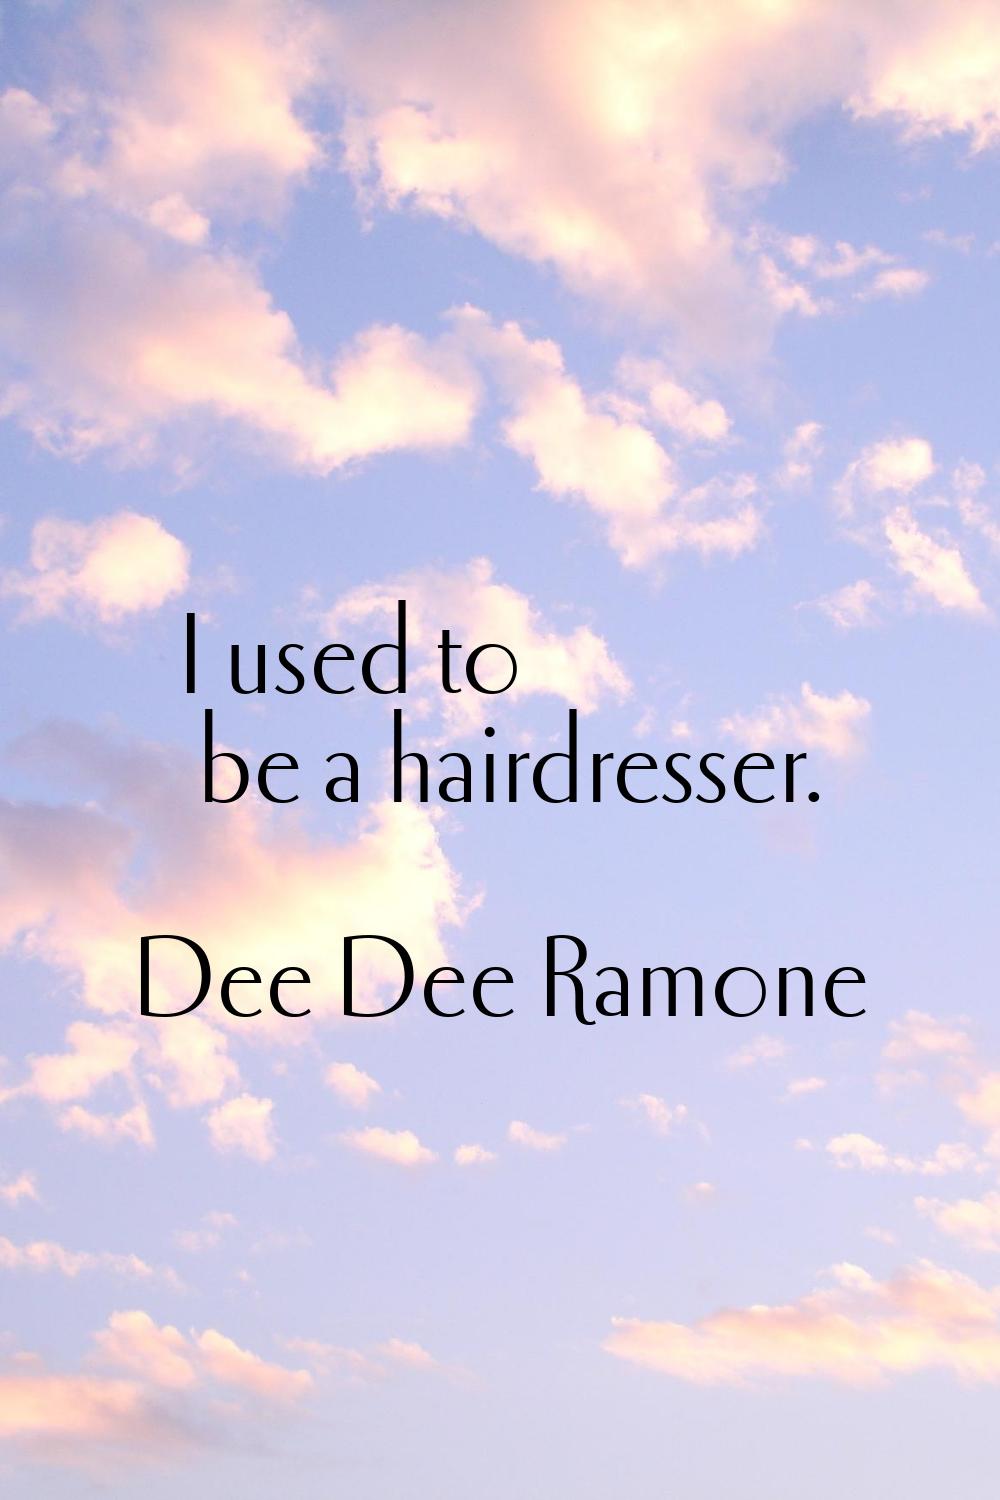 I used to be a hairdresser.